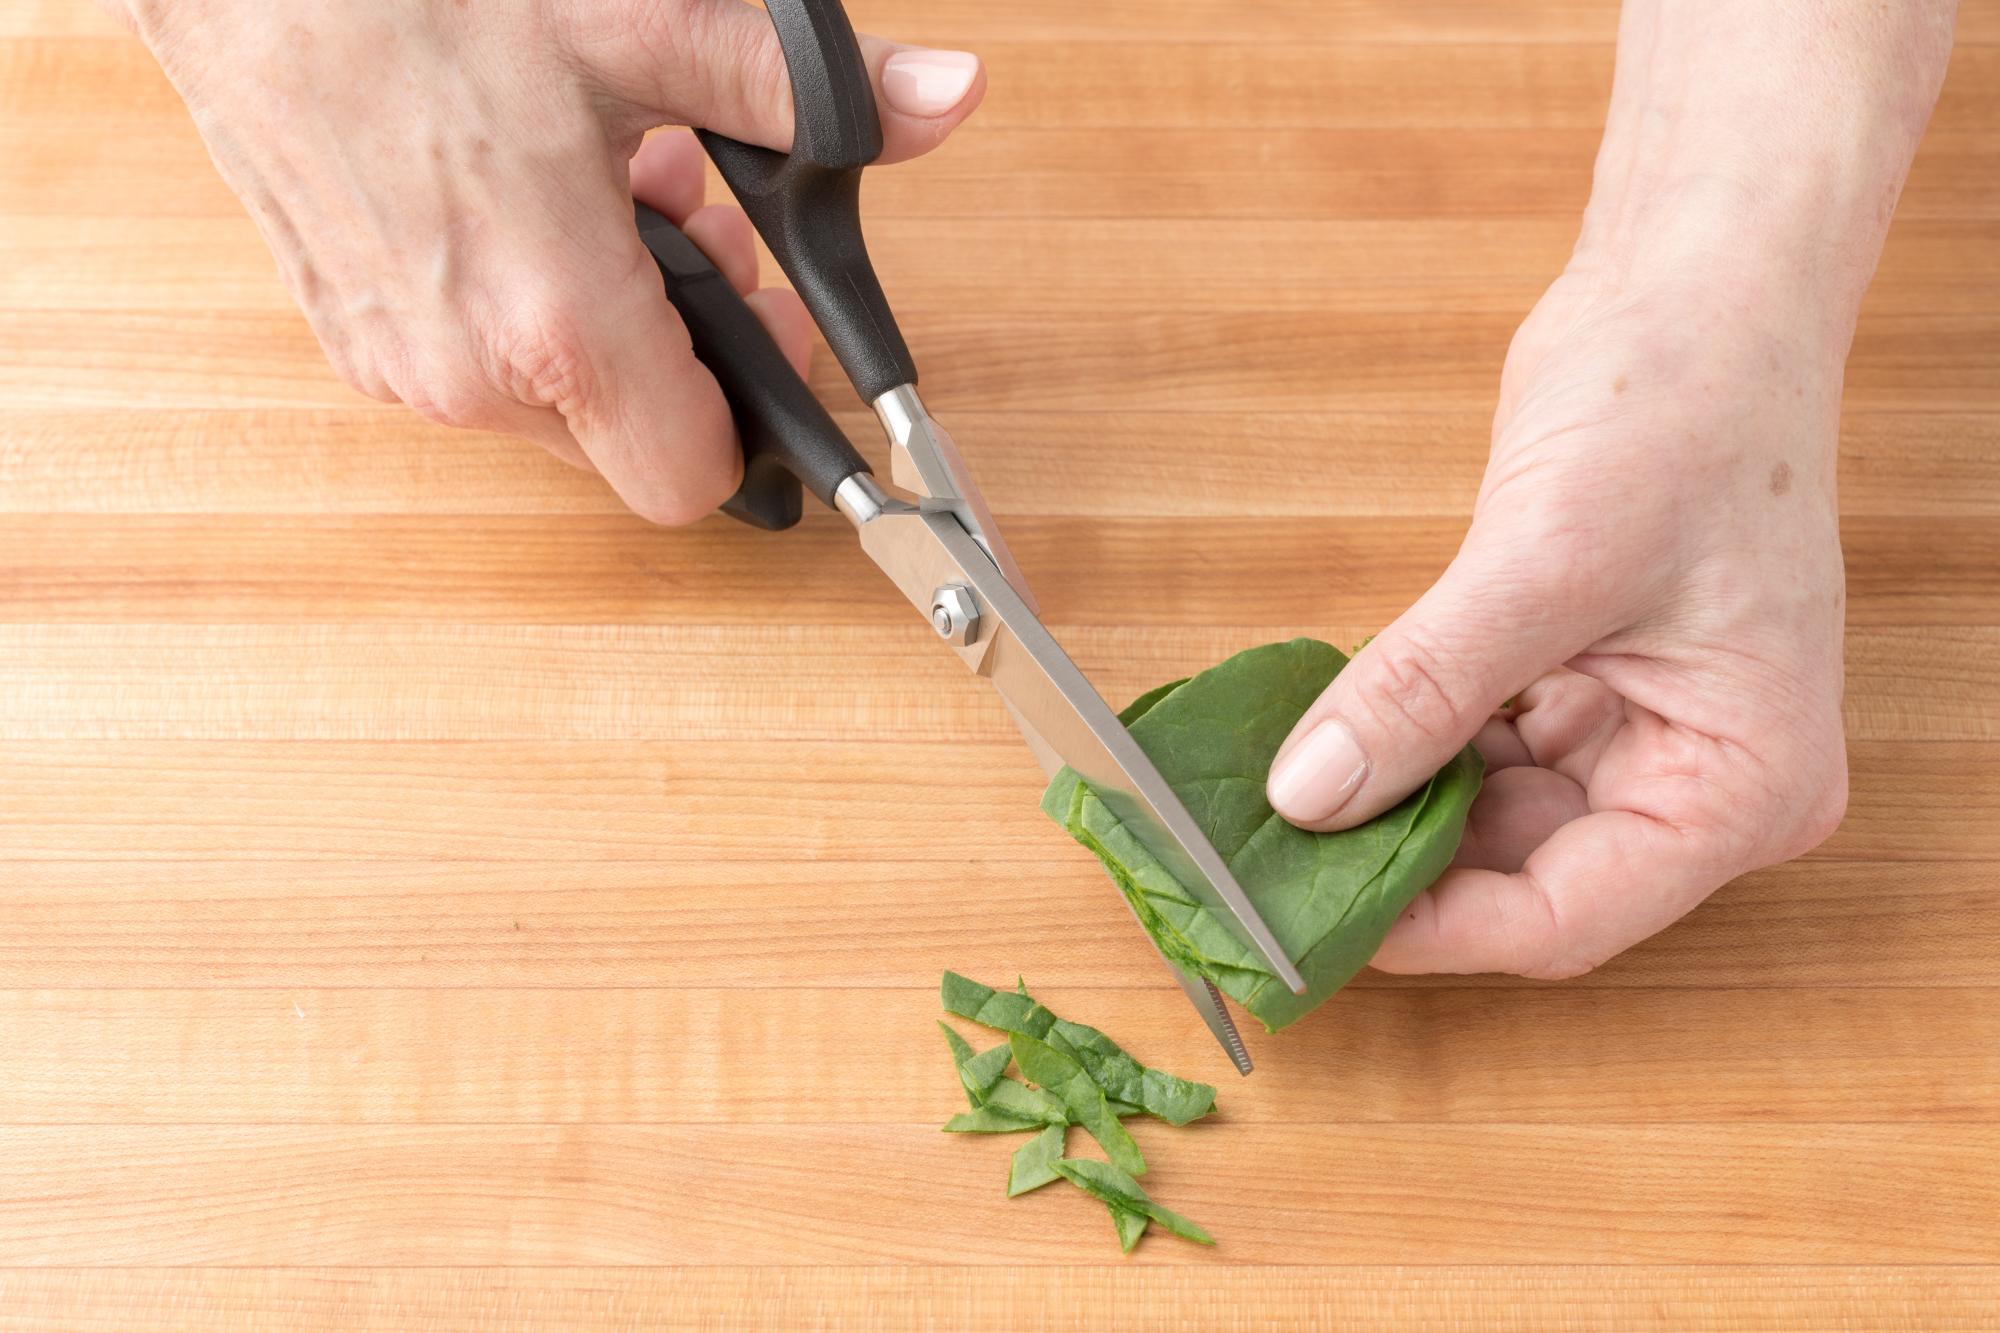 Using the Super Shears to trim the baby spinach.